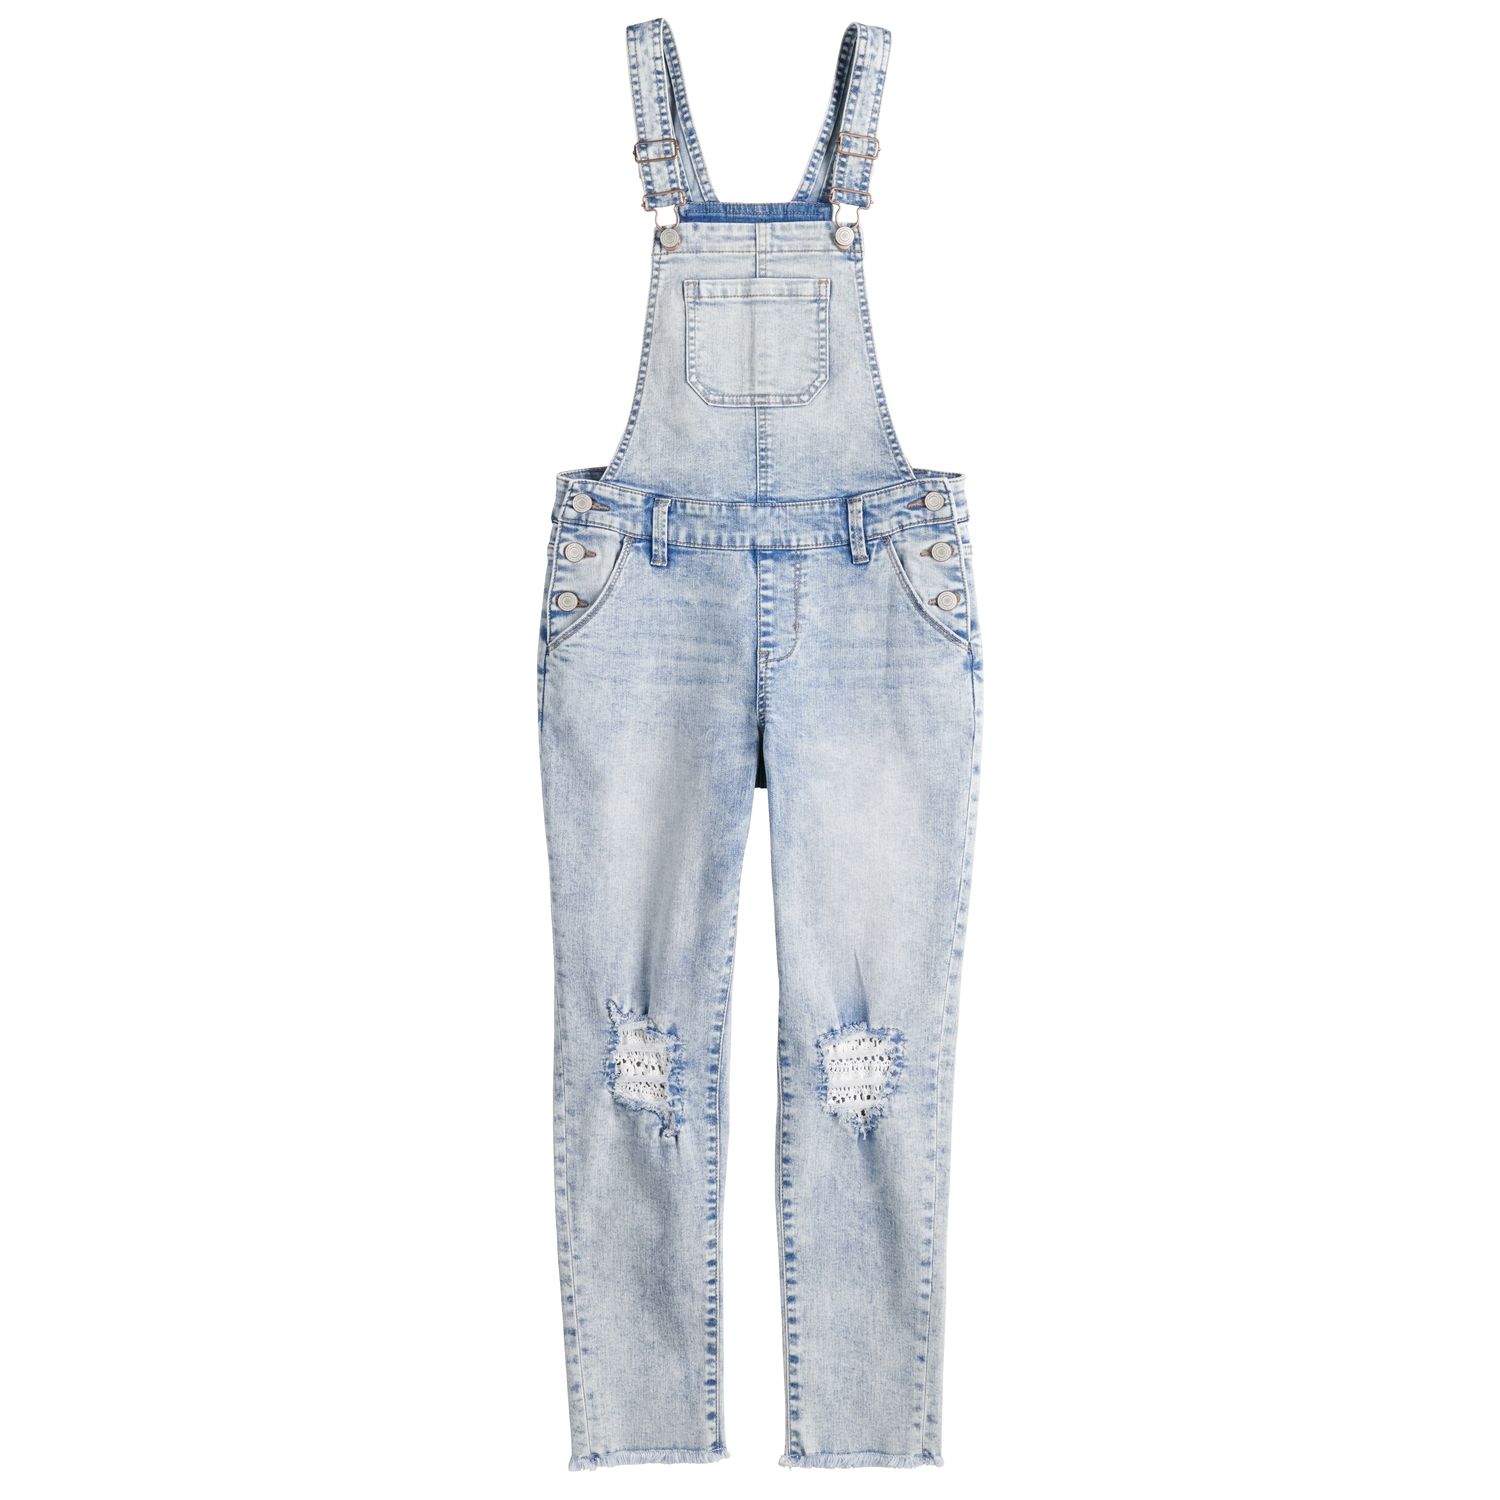 girls size 8 overalls